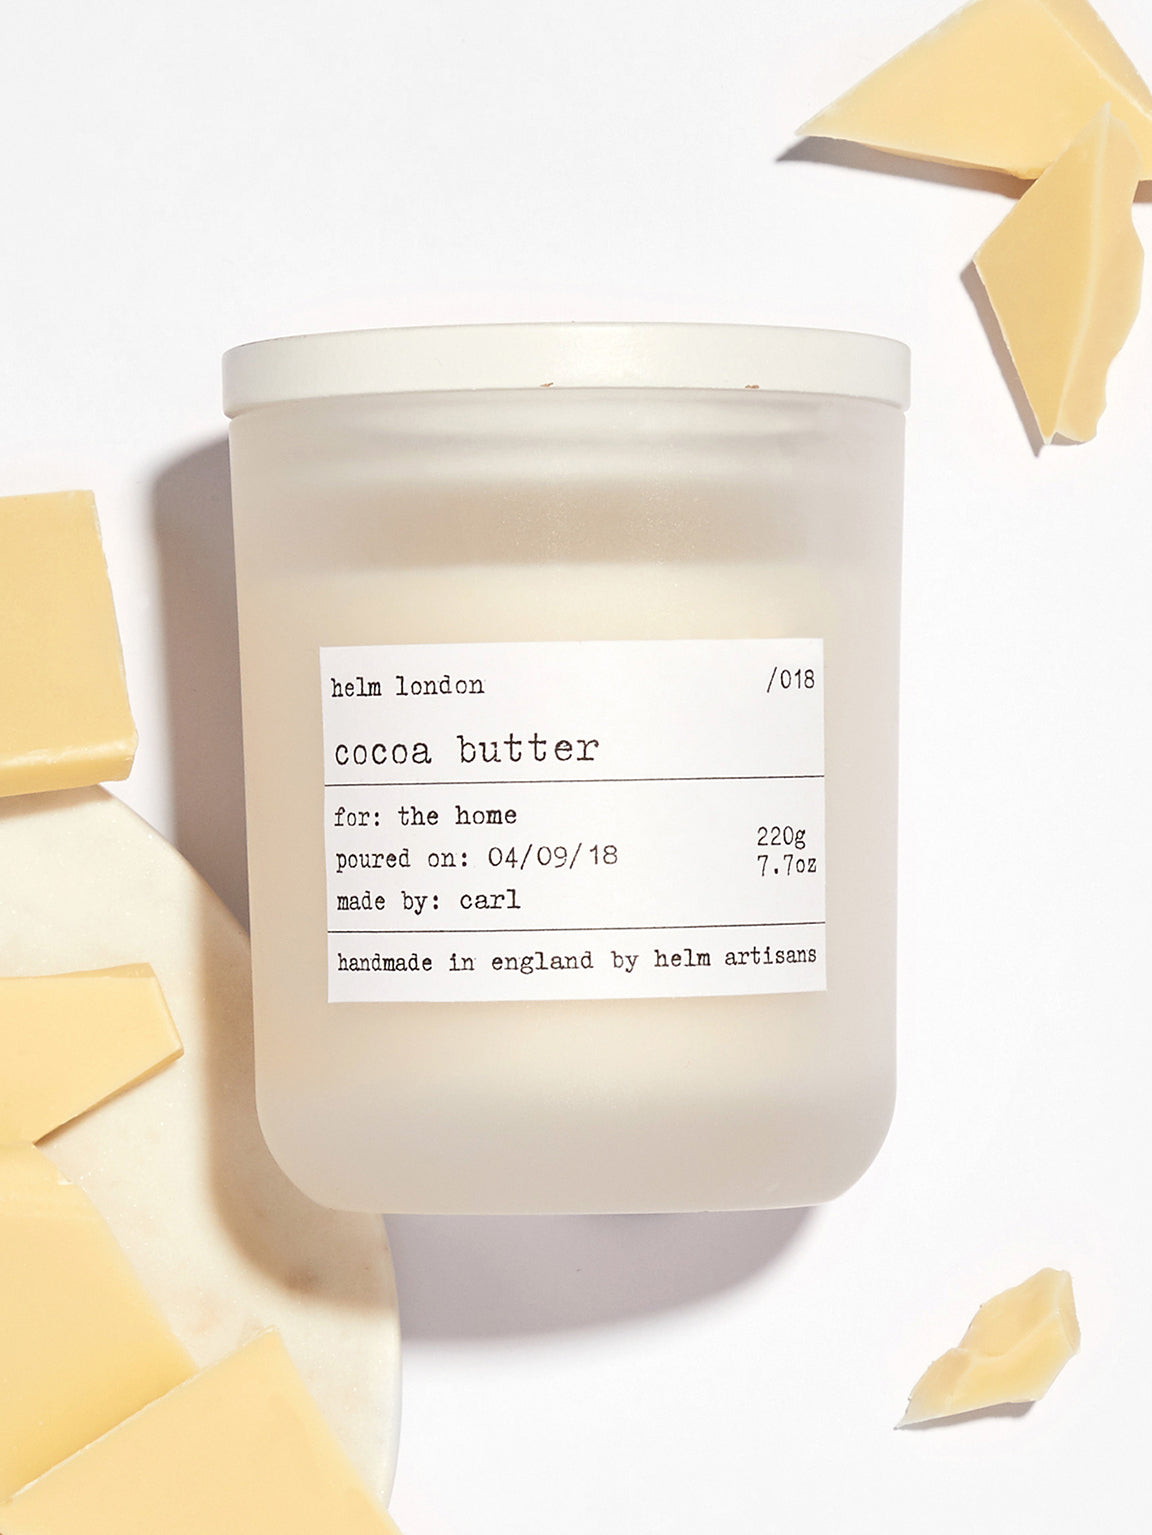 Helm London Cocoa Butter Signature Candle